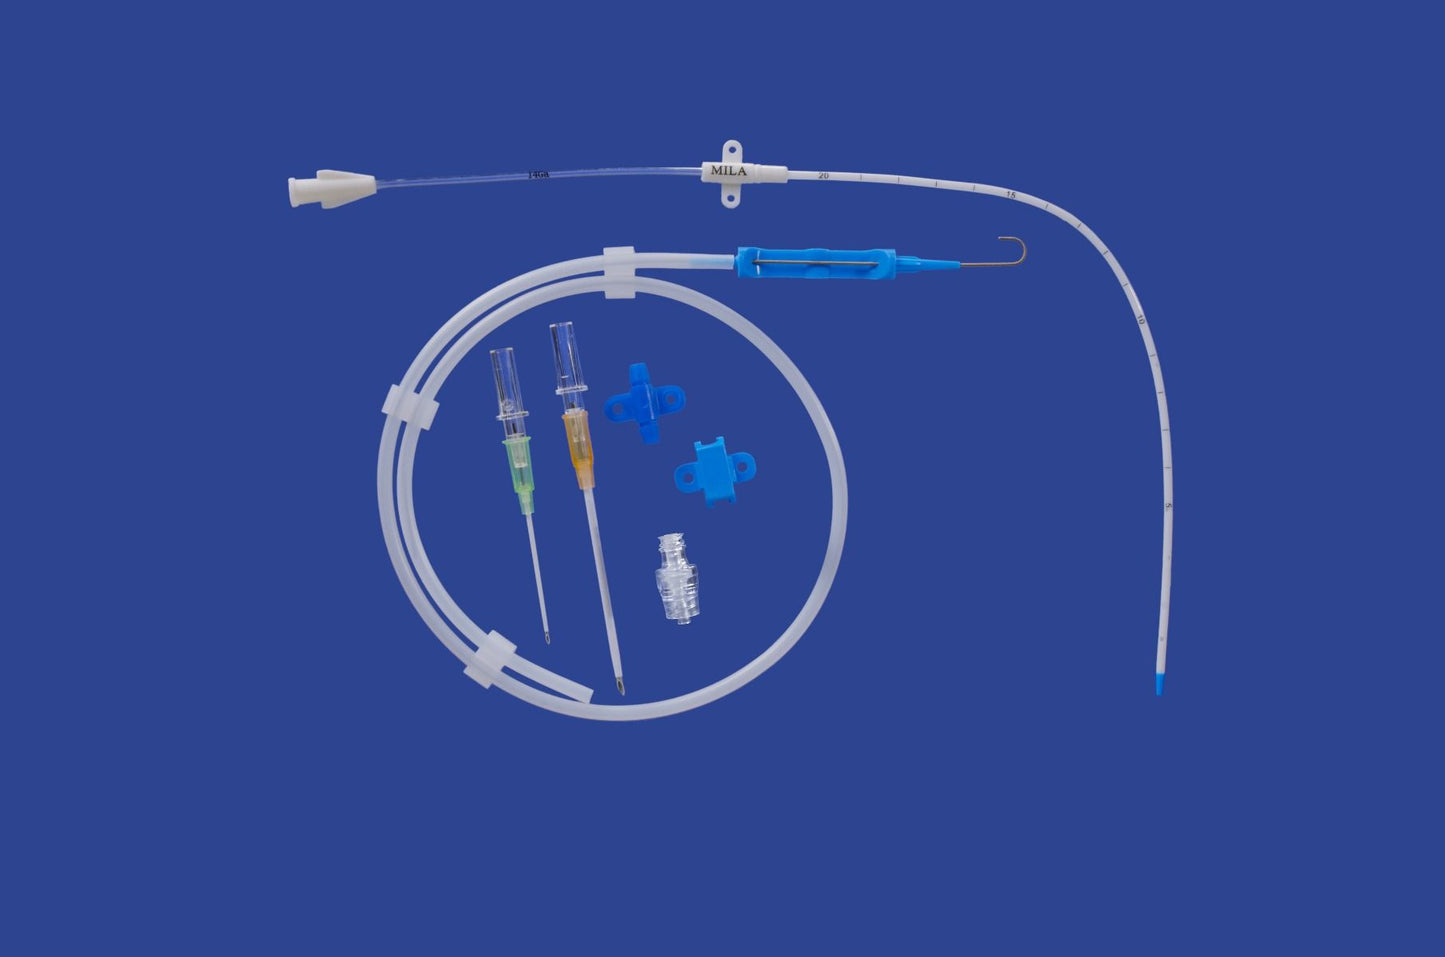 Guidewire Inserted Chest Tube